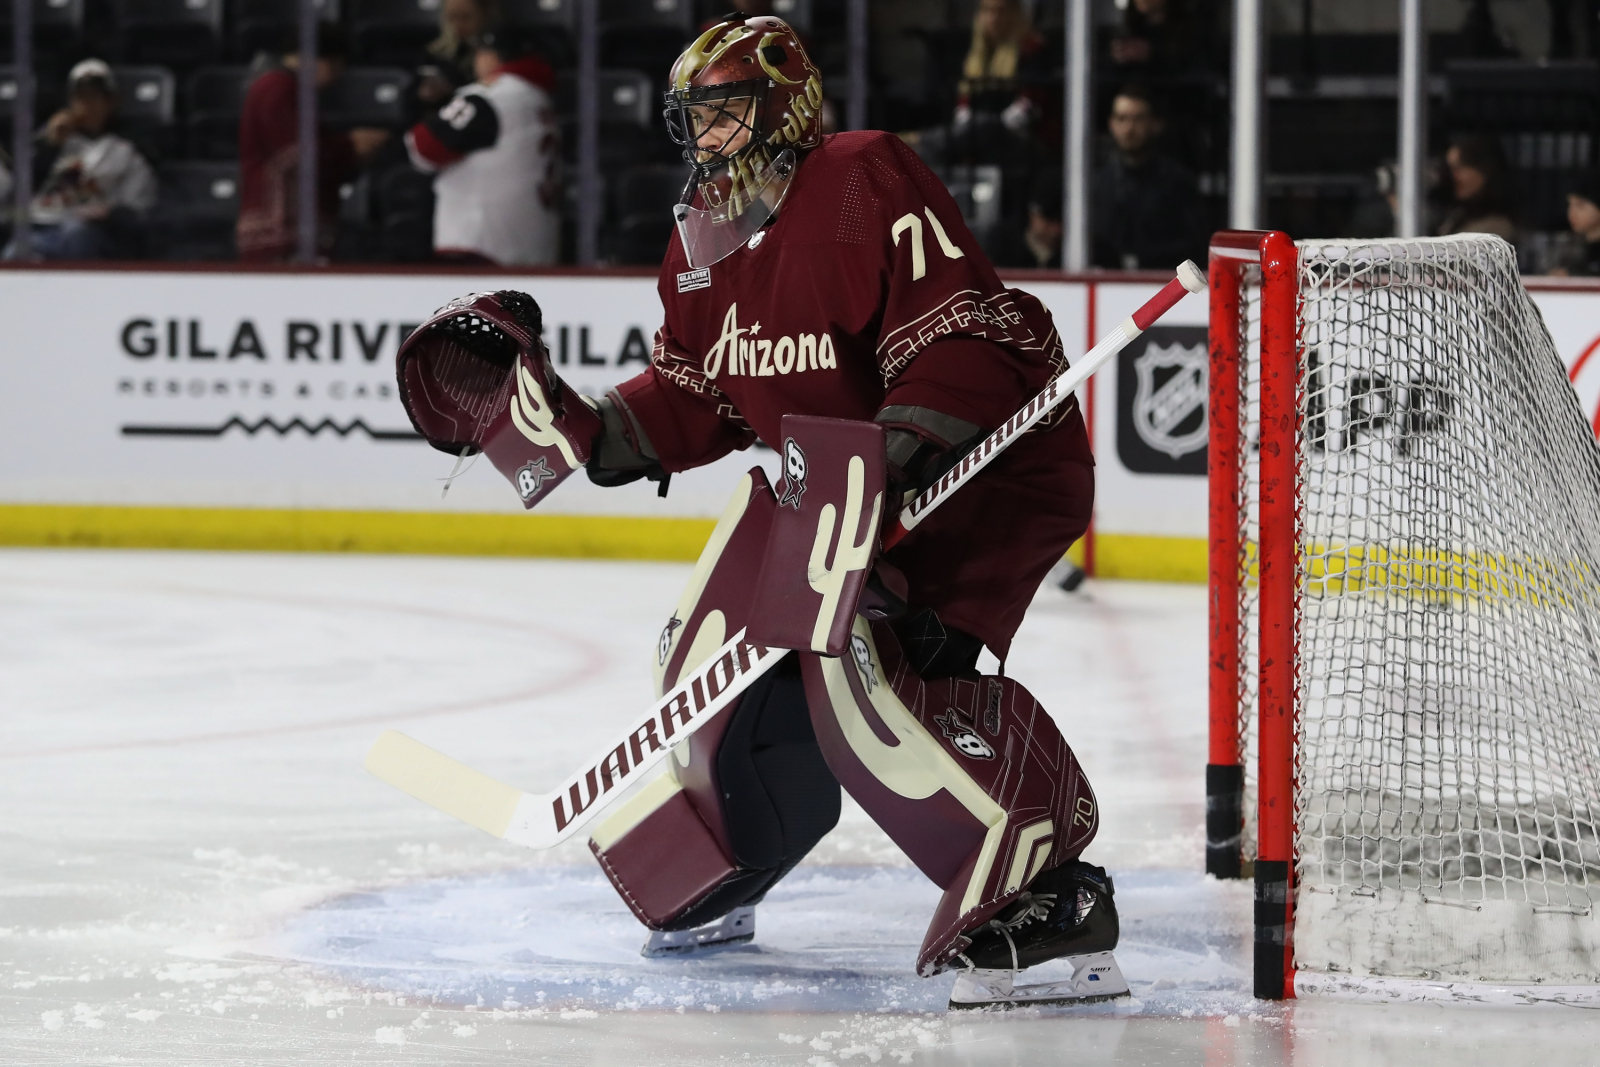 Desert Dogs - Predicting the Remaining Games With the 'Yotes New Unis